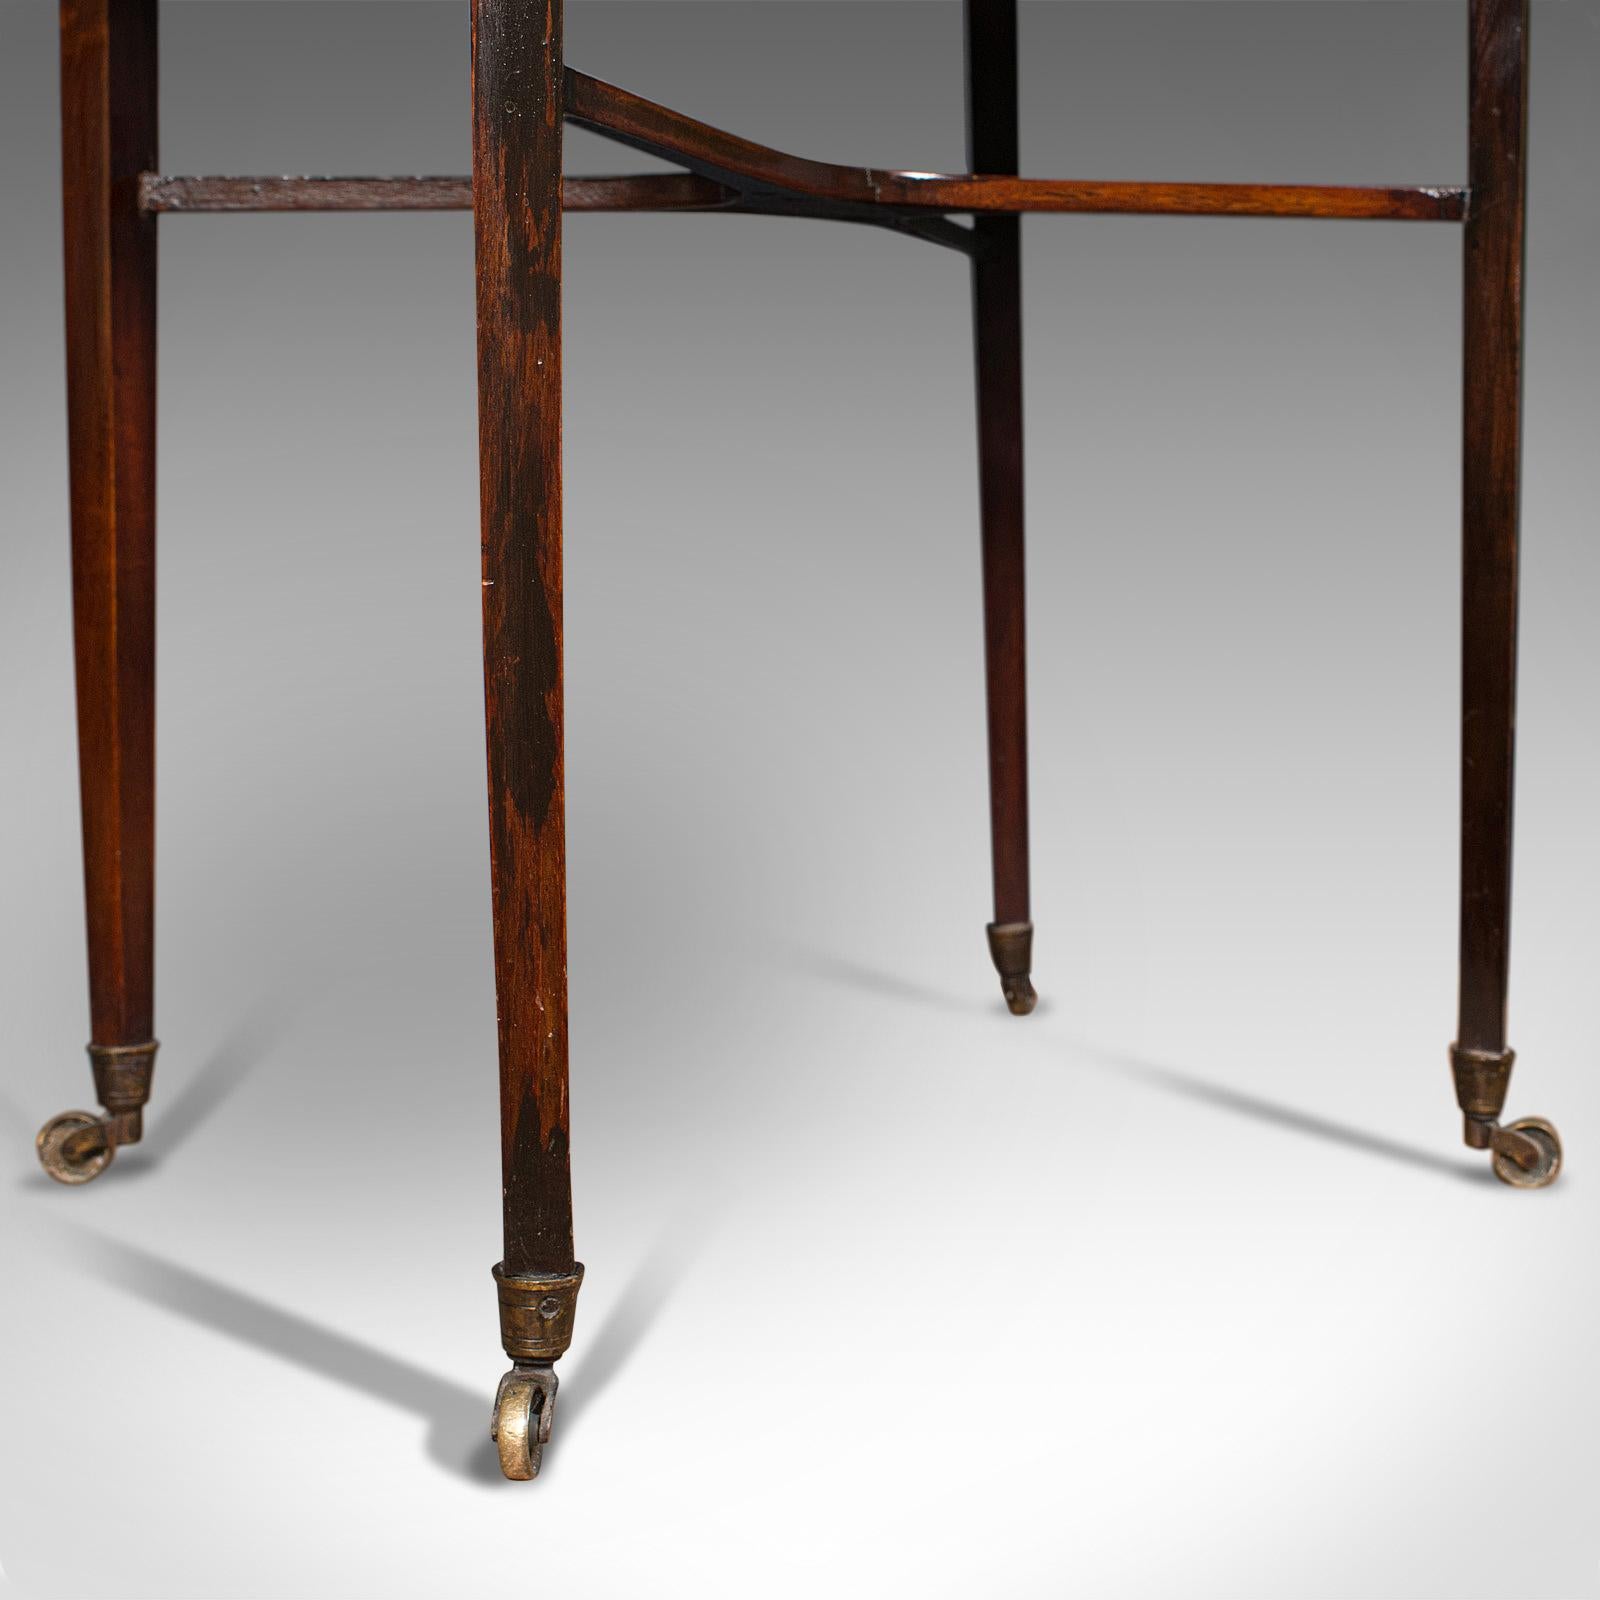 Antique Sewing Table, English, Mahogany, Silk Cotton, Work, Regency, Circa 1820 For Sale 7